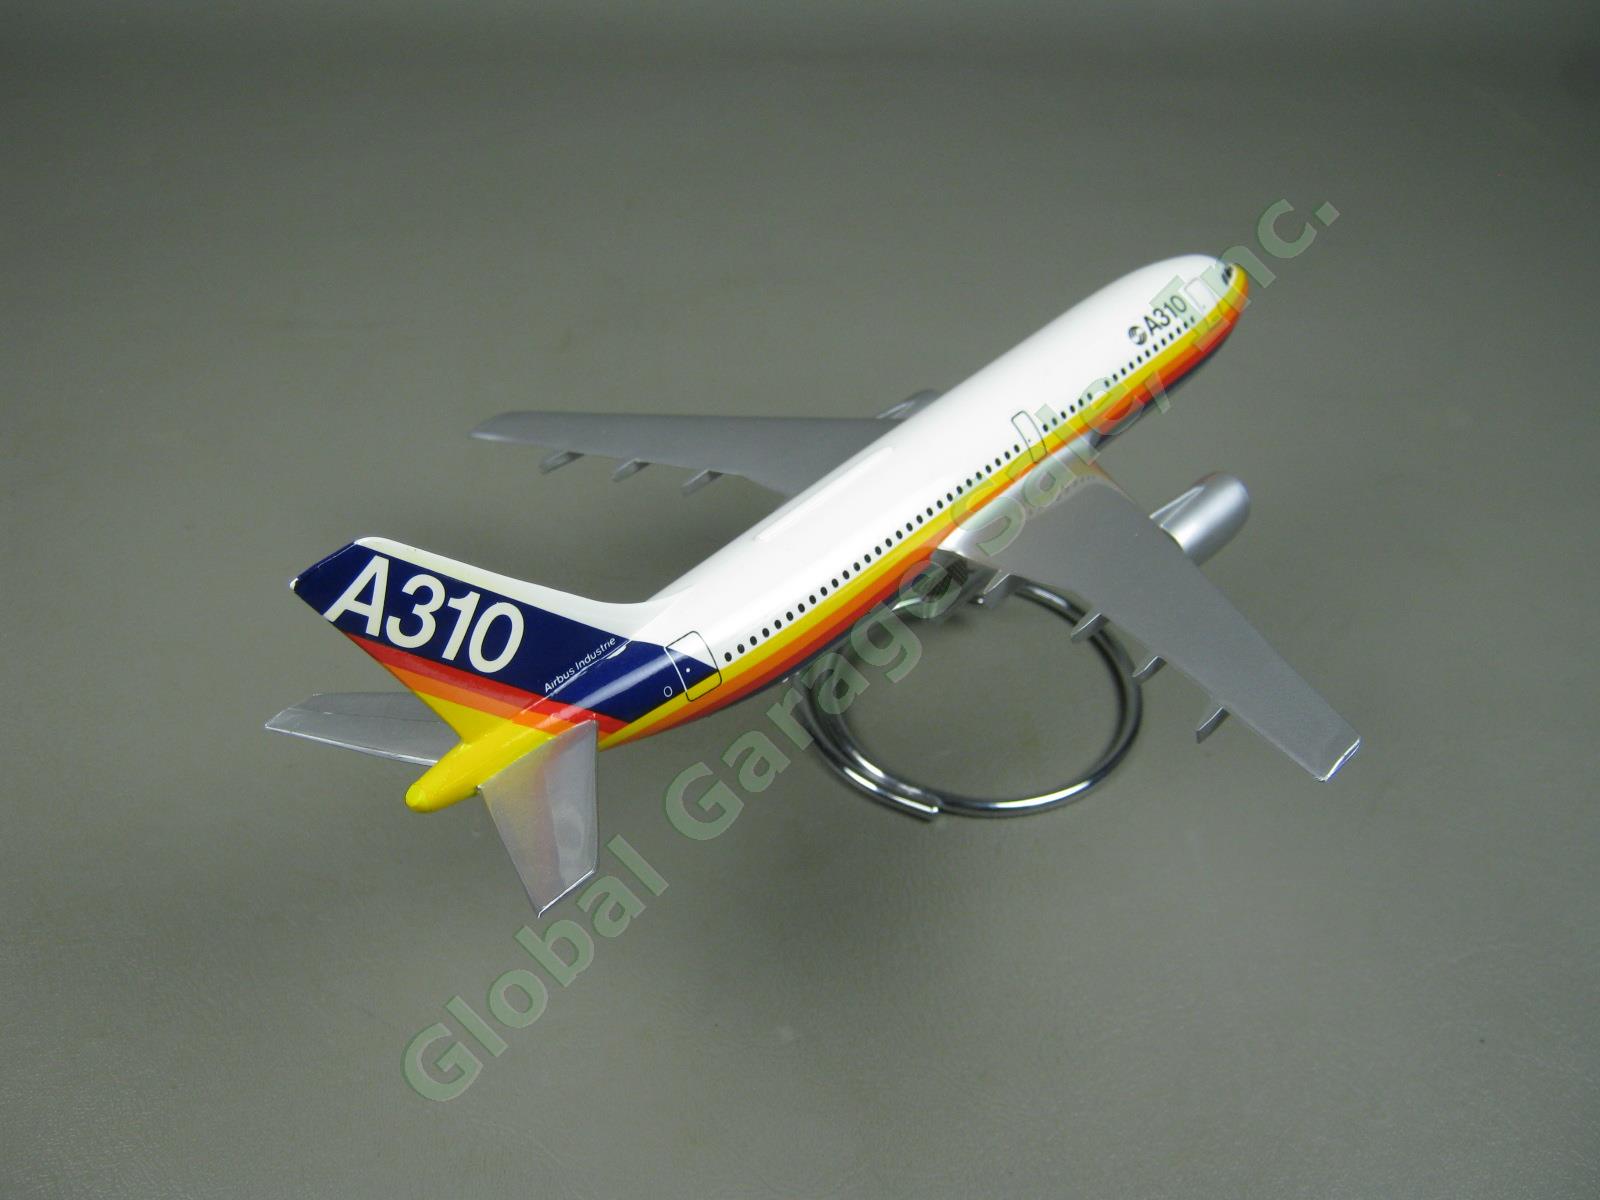 Airbus Industrie A310-203 Desktop Display Model Airline Aircraft Airplane 9.25" 3